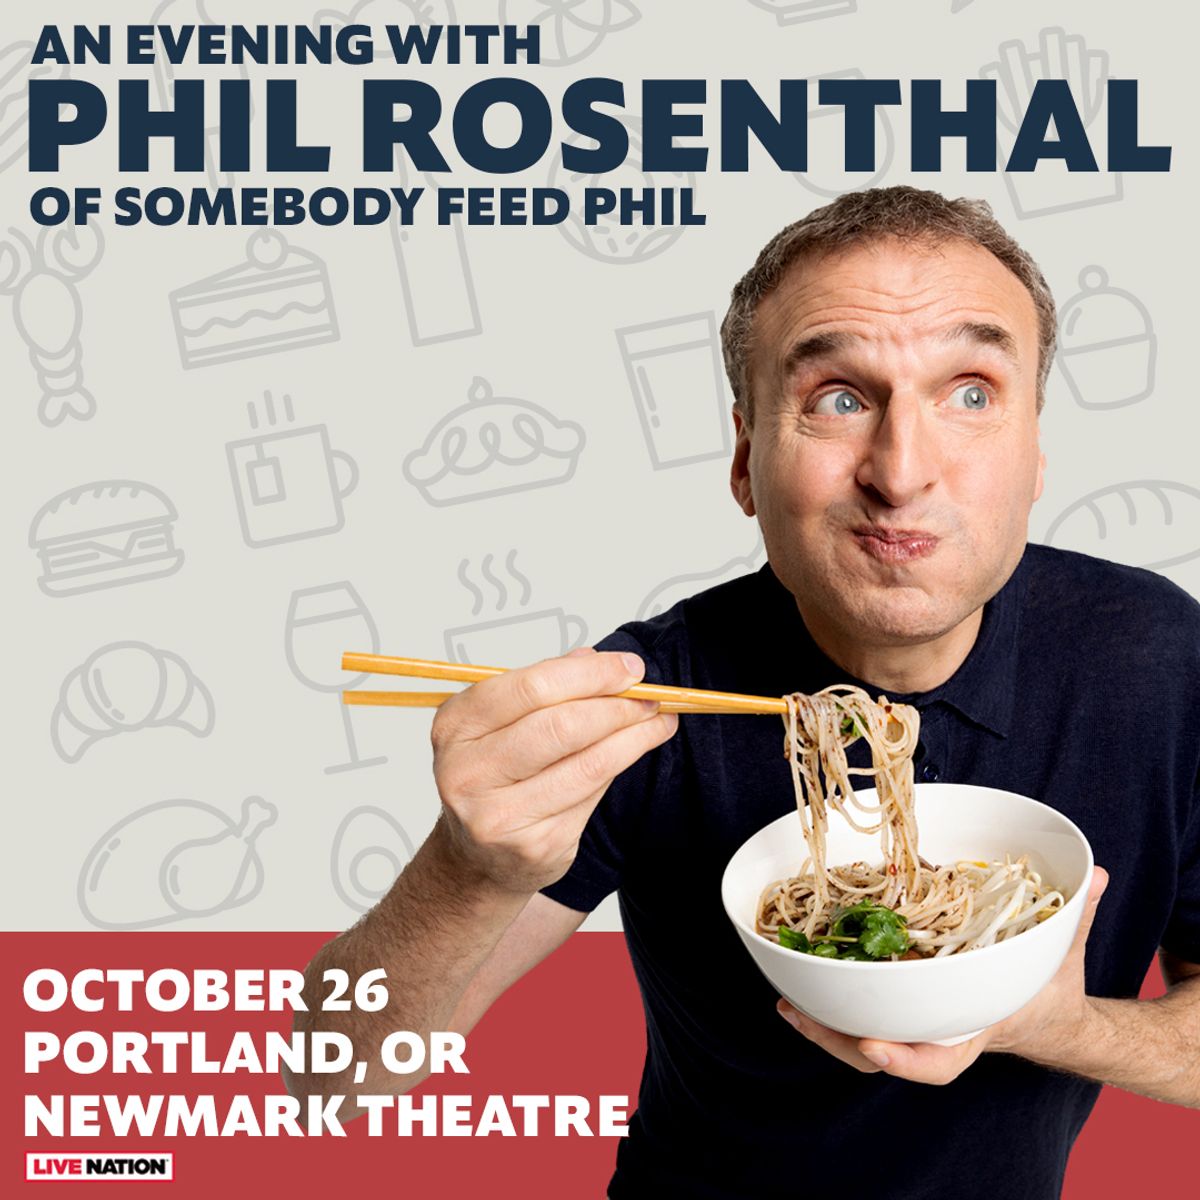 An Evening with Phil Rosenthal of Somebody Feed Phil at Newmark Theatre